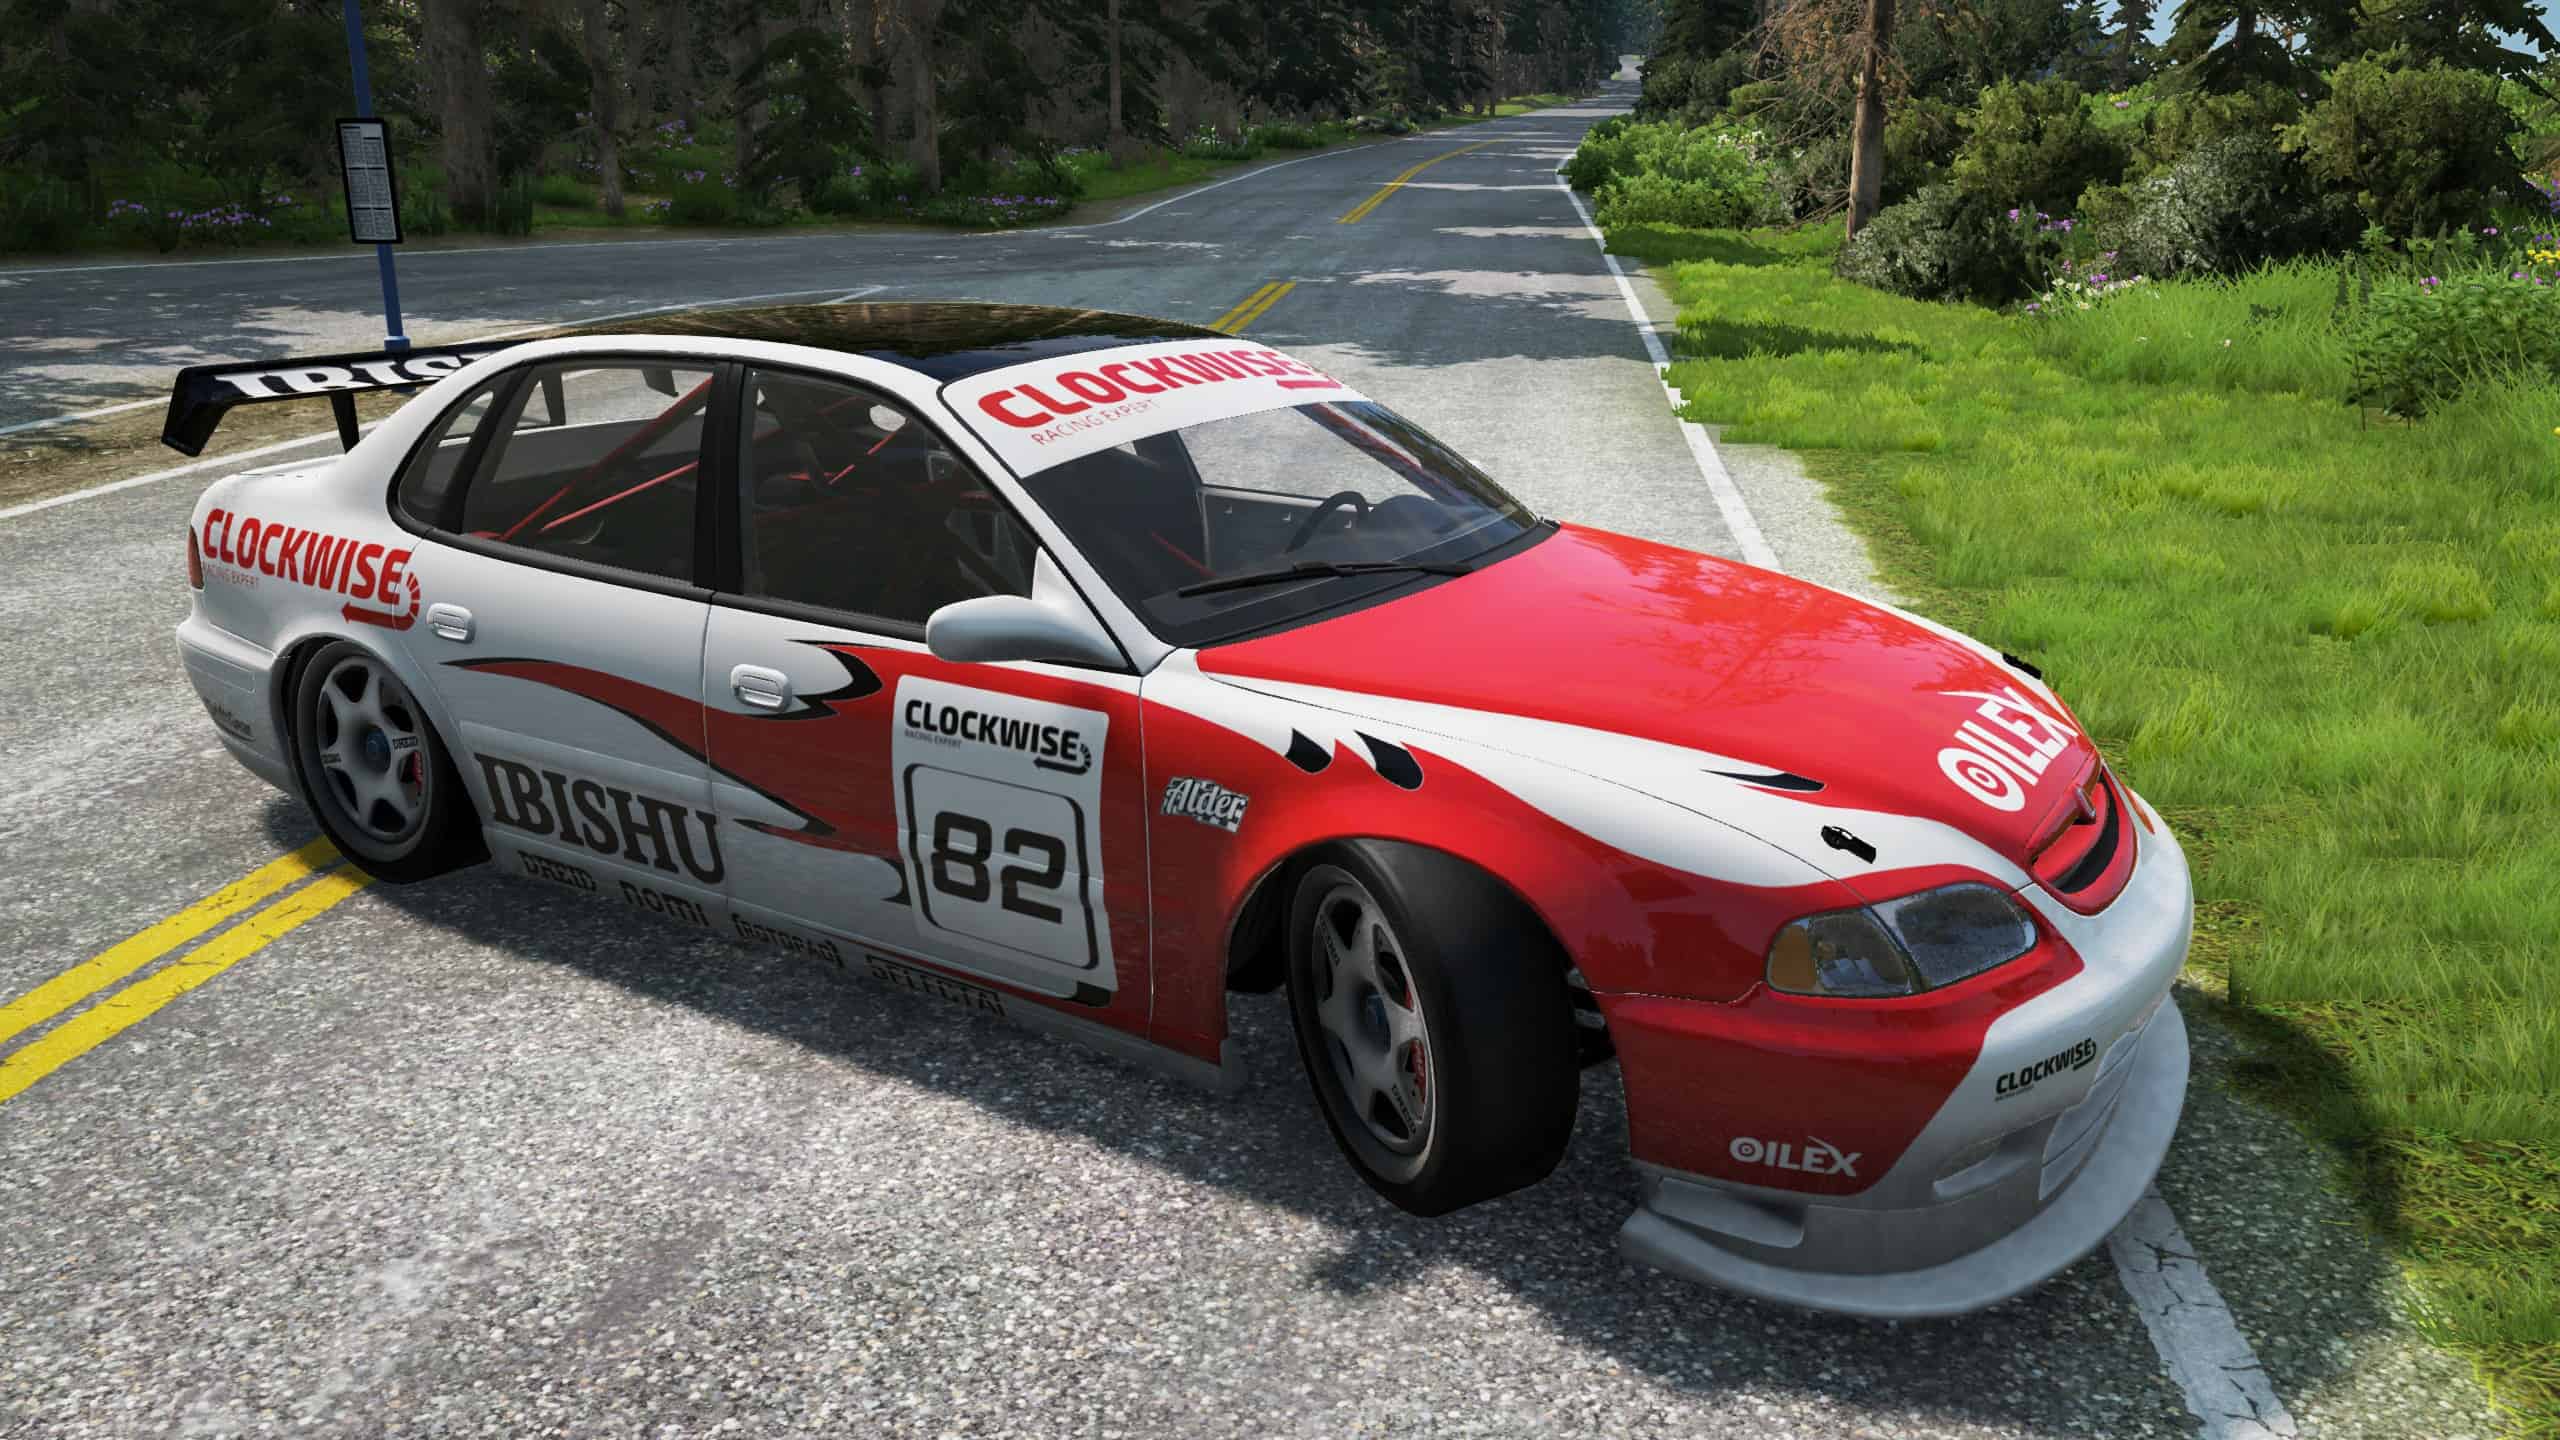 Gran Turismo 4 Remastered Mod: A Full Graphics Overhaul! : r/Games